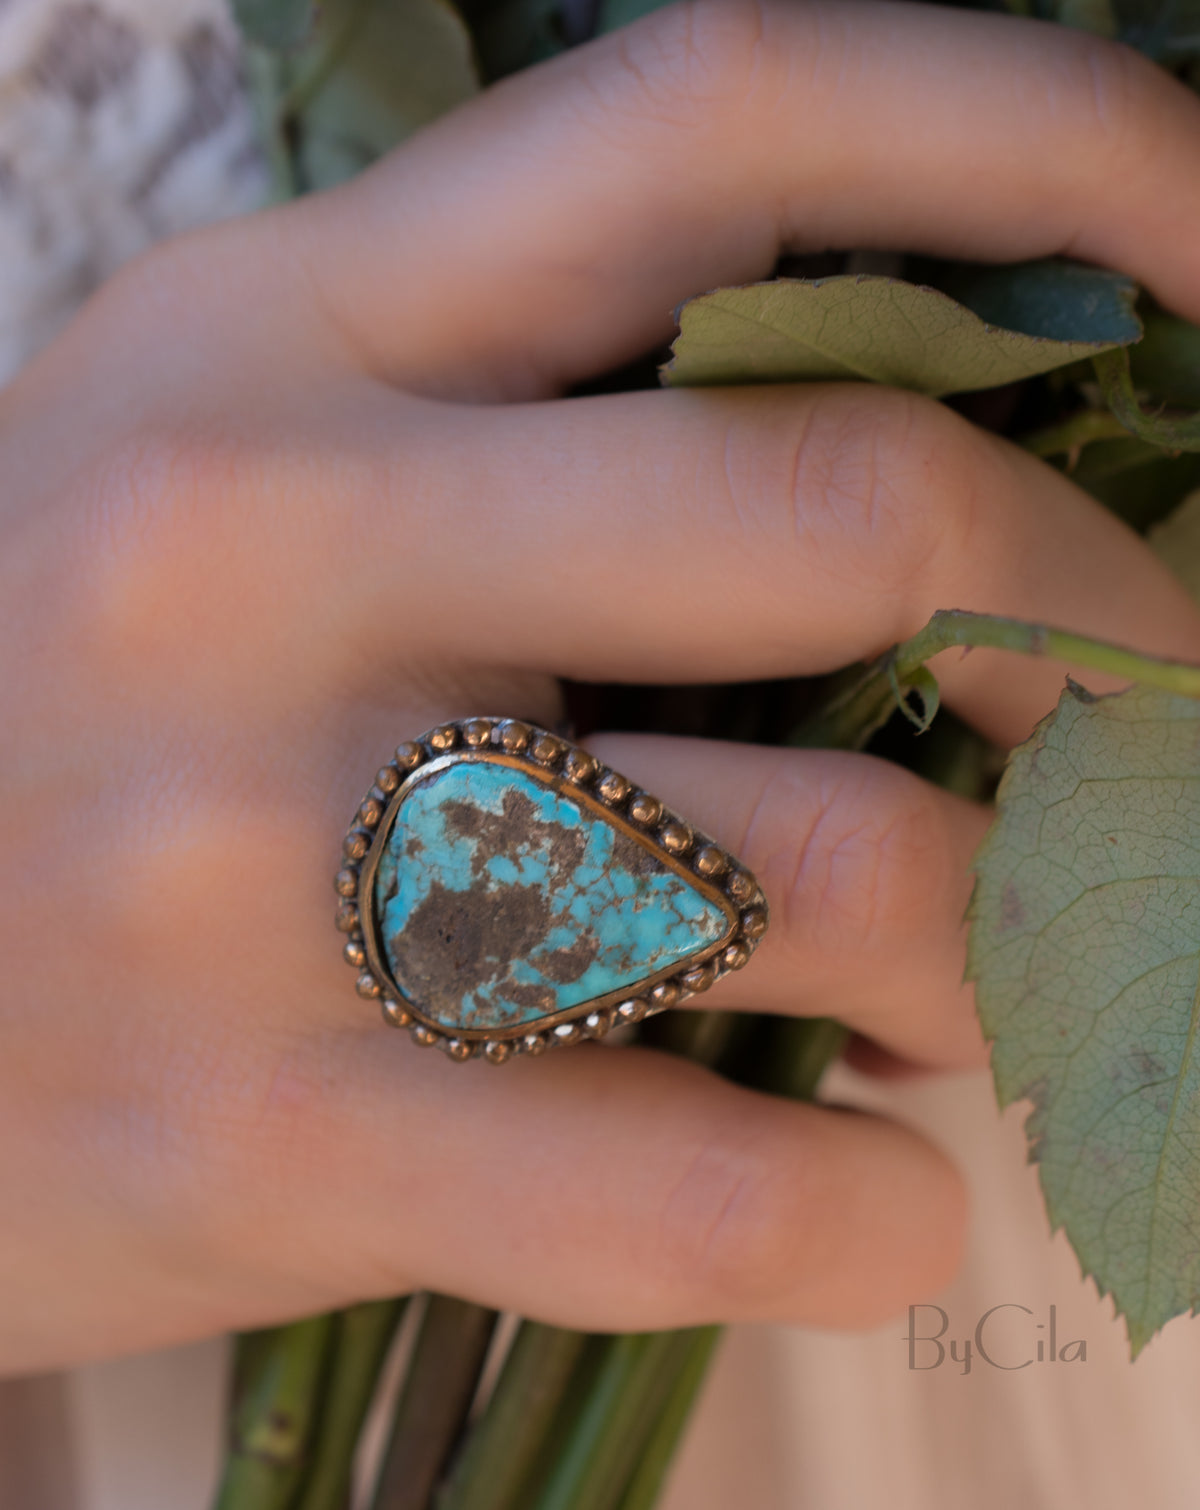 Terissa Ring * Turquoise * Sterling Silver 925 * SBJR002